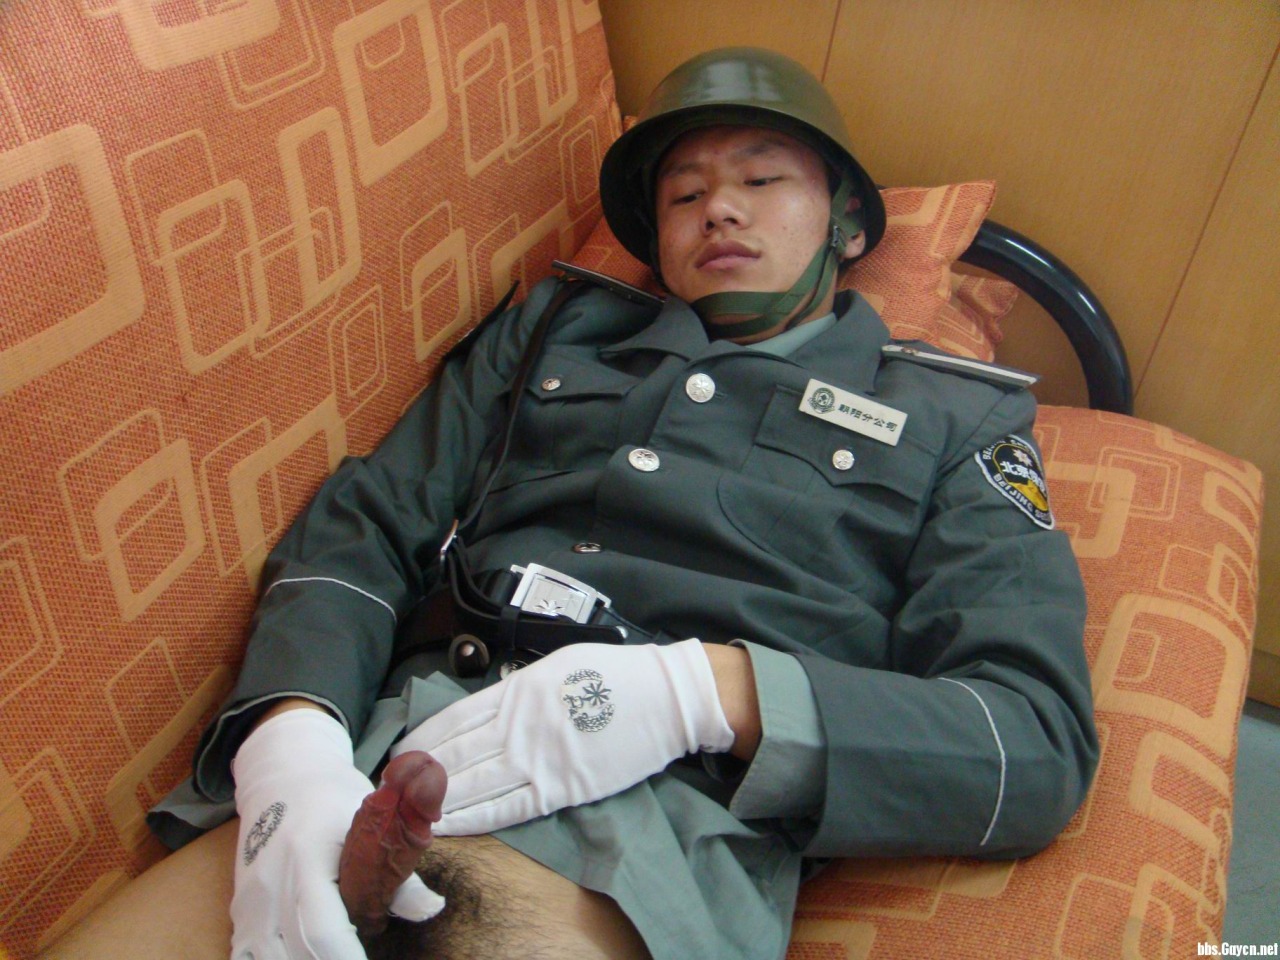 chinese-security-guard-150113-1.jpg